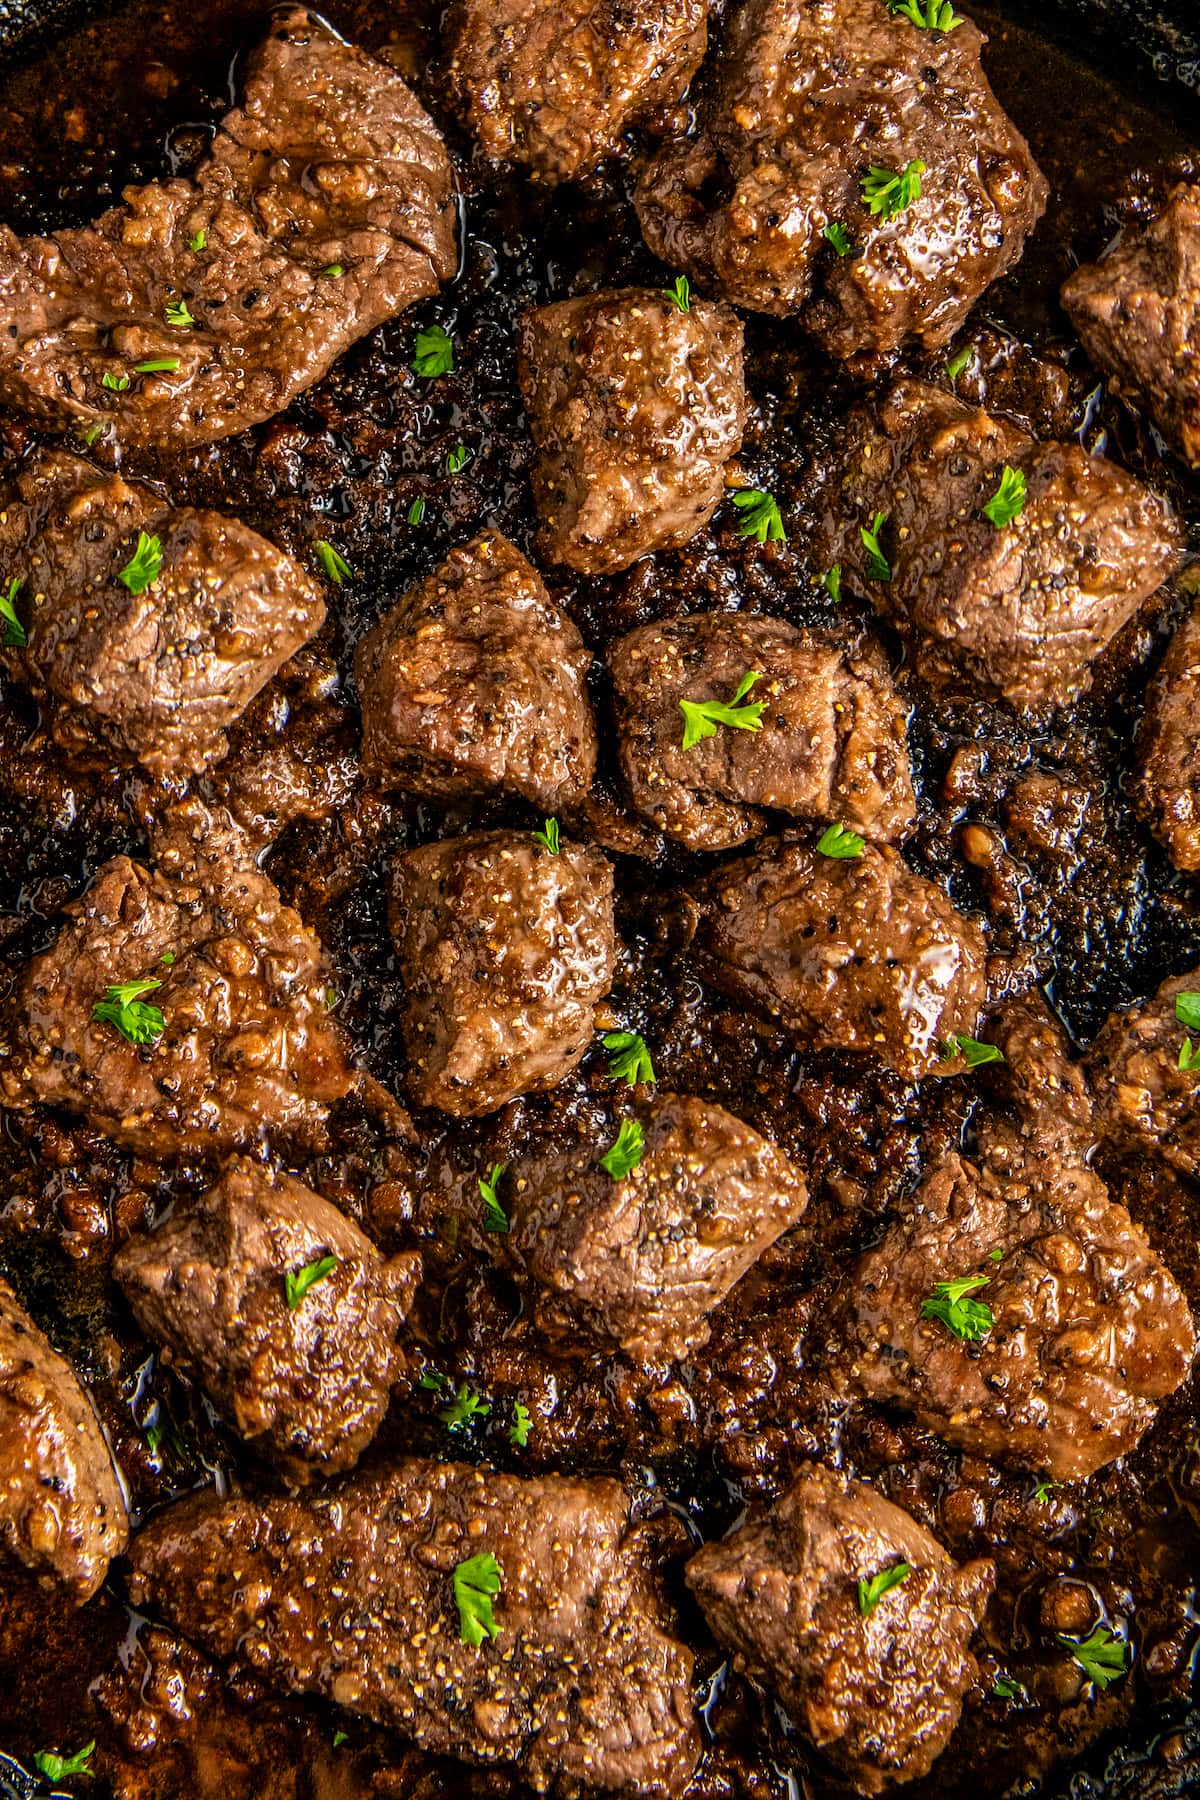 Close up overhead view of steak bites with garlic butter cooking in a cast iron skillet.